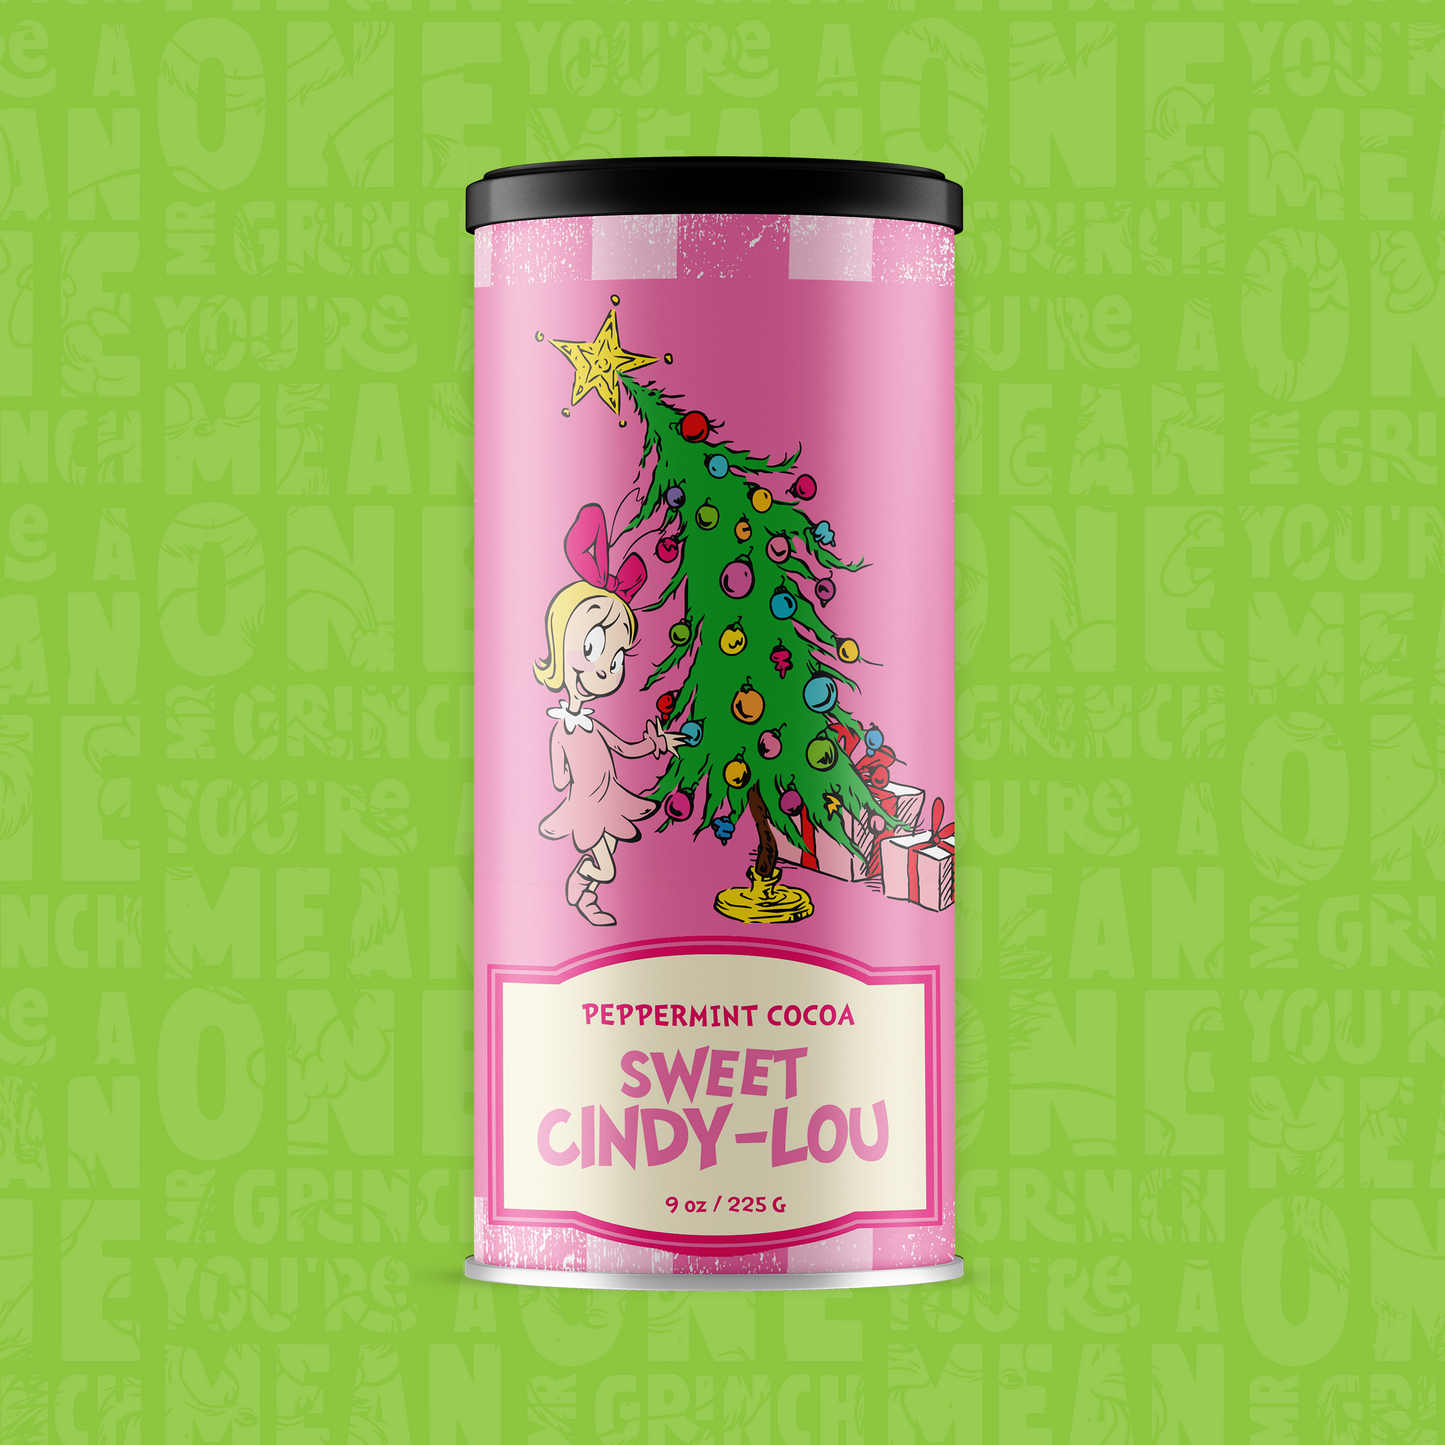 Sweet Cindy-Lou : Peppermint Cocoa